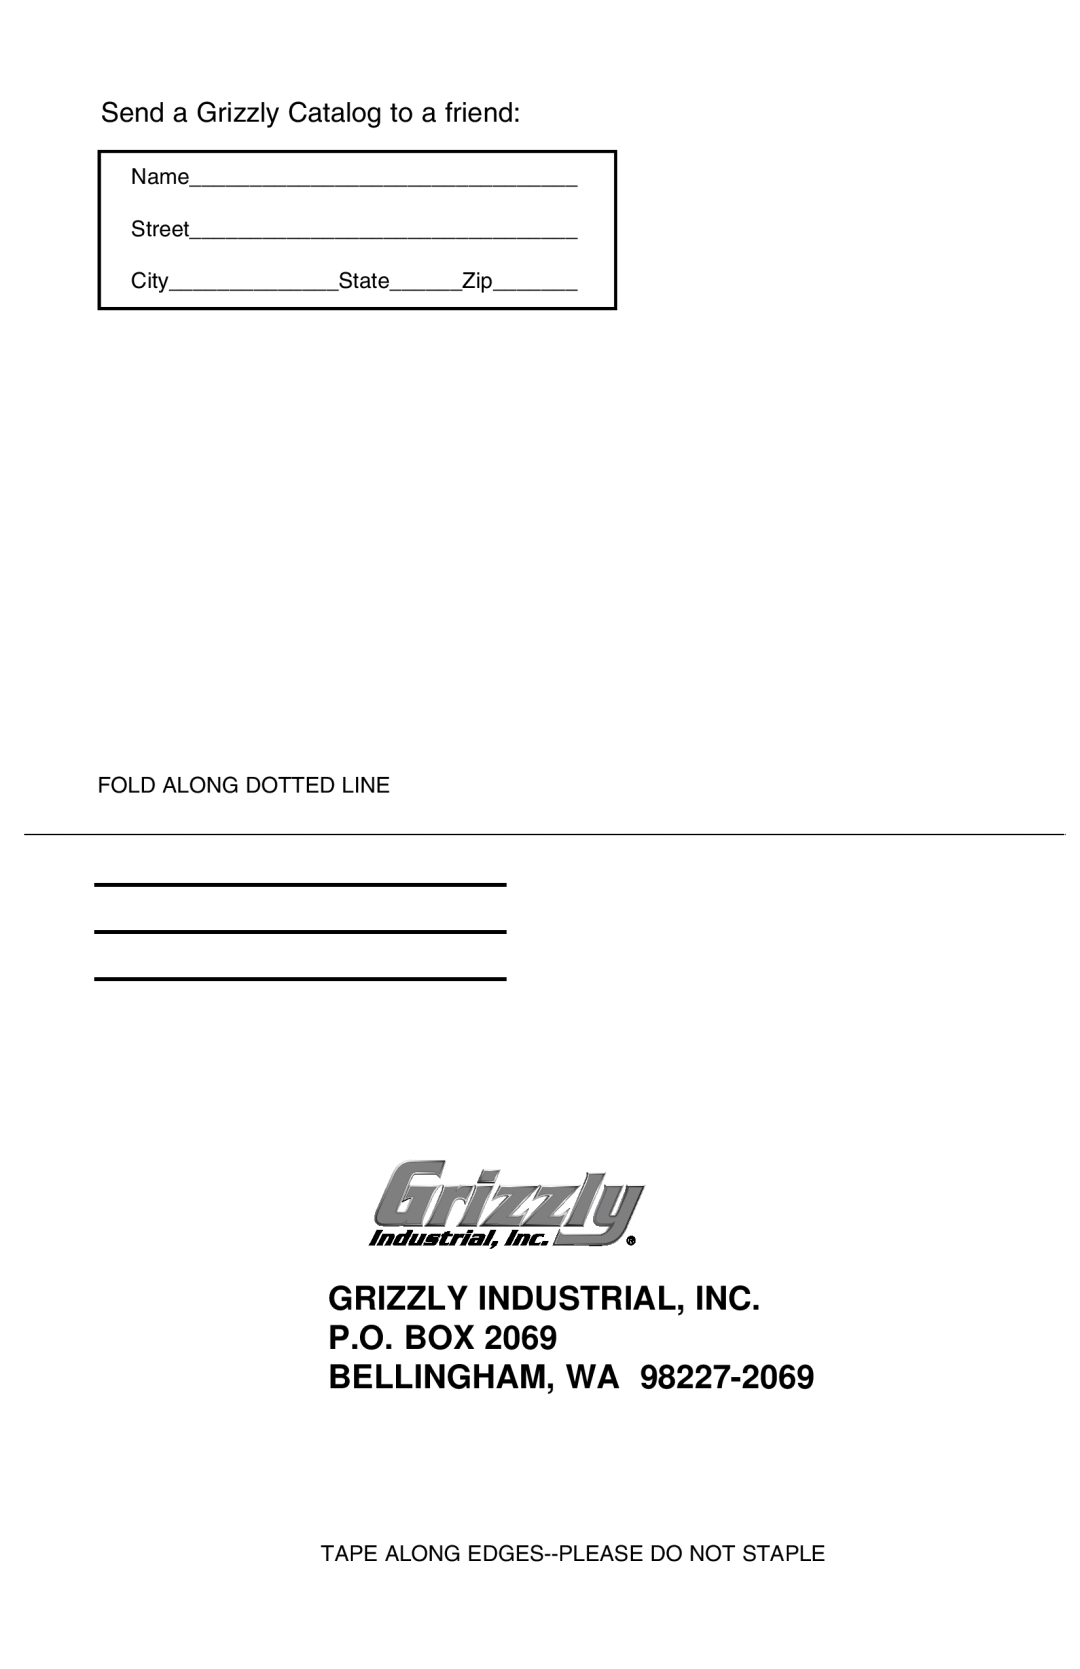 Grizzly H0599 instruction manual Send a Grizzly Catalog to a friend, Grizzly Industrial, Inc P.O. Box Bellingham, Wa 